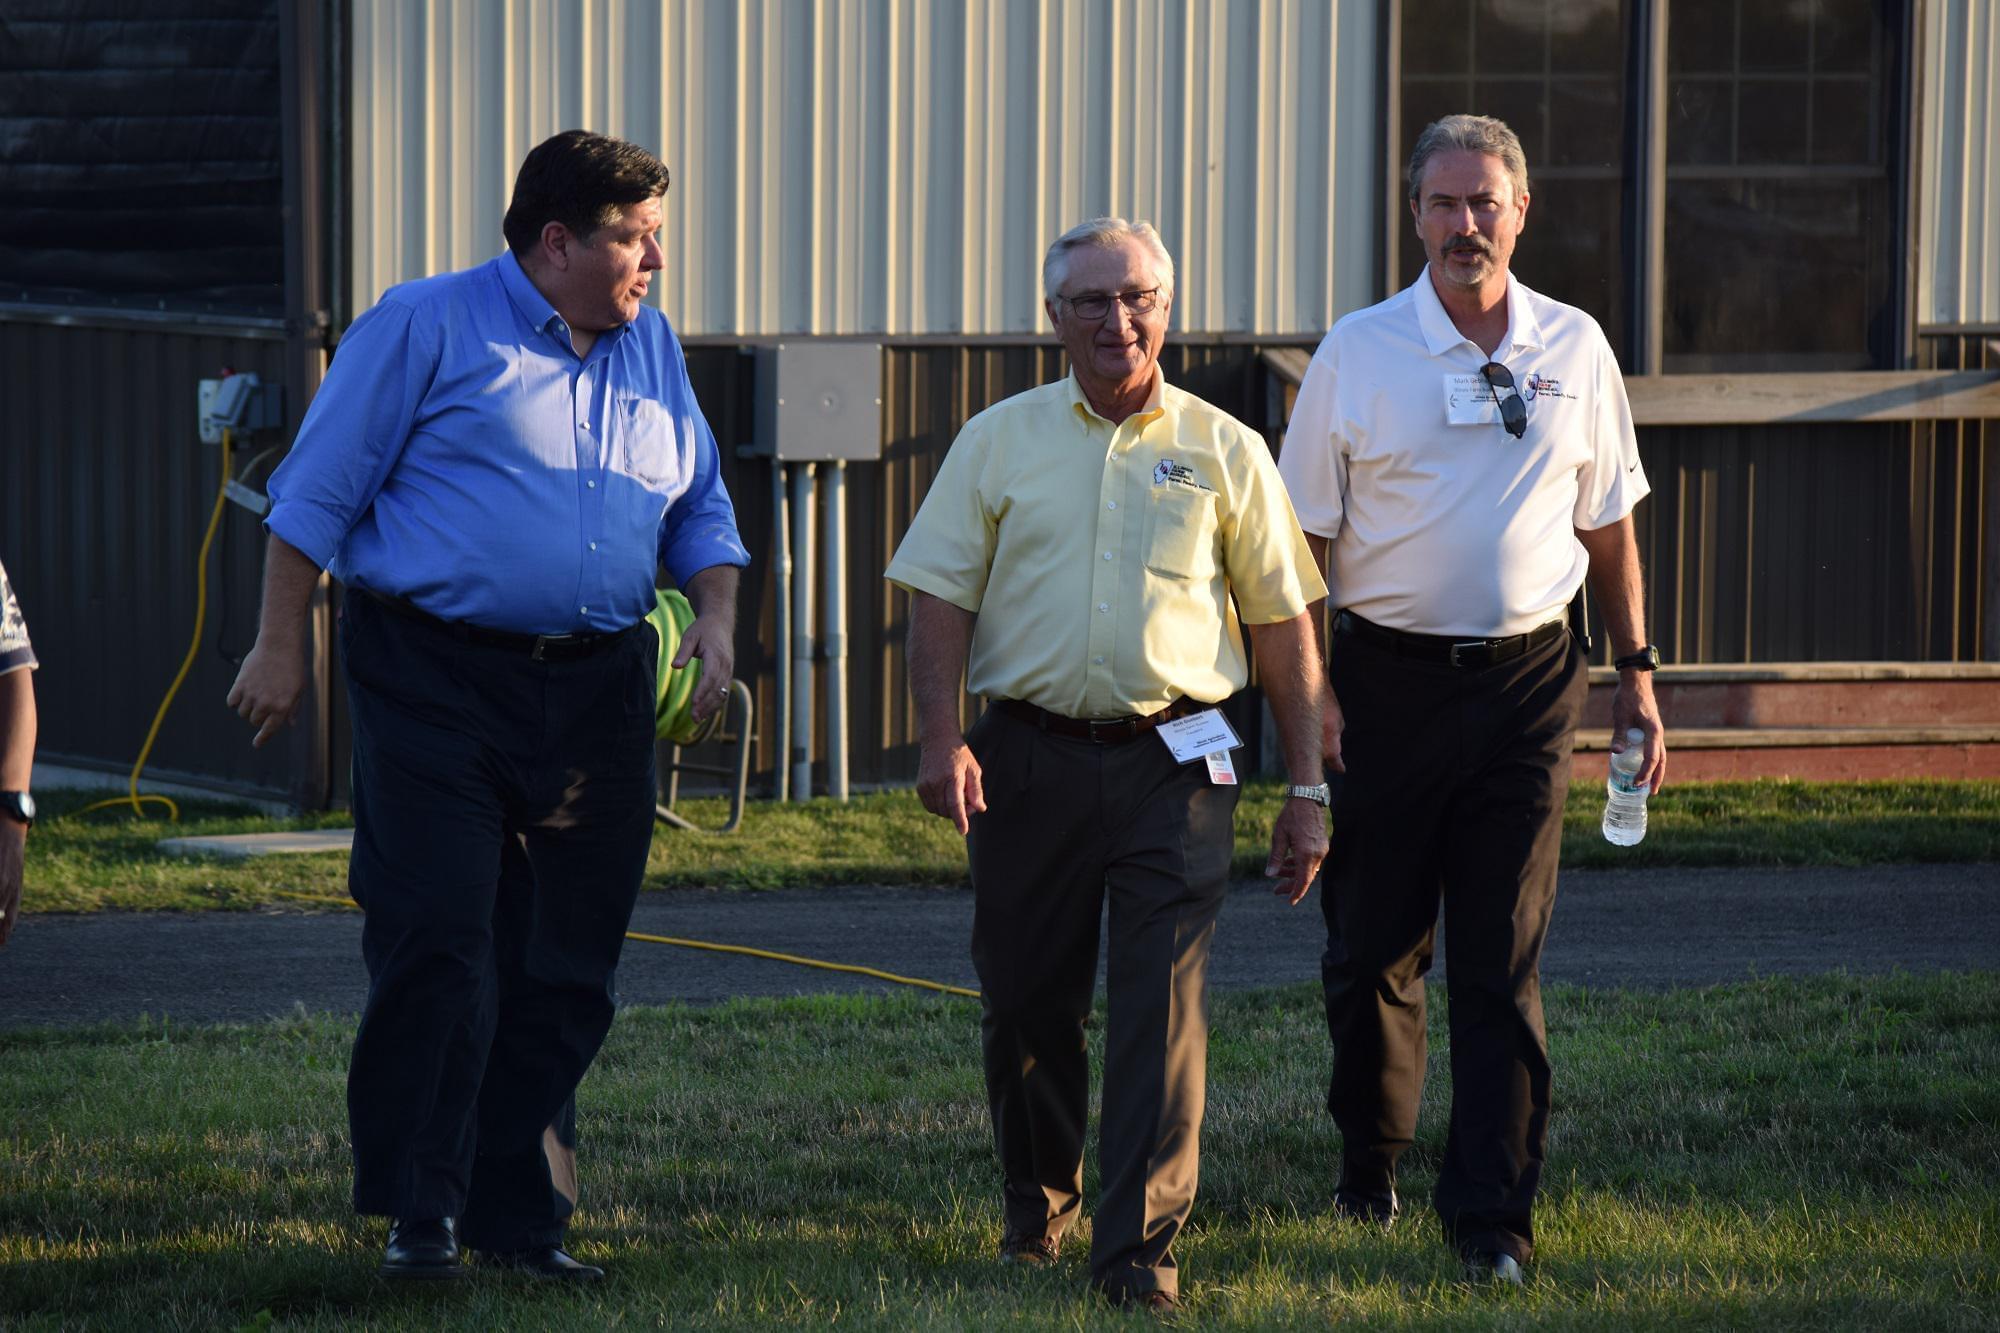 Democratic candidate for governor J.B. Pritzker, left, with Rich Guebert and Mark Gebhards from the Illinois Farm Bureau on Wednesday, Aug. 22, 2018, in Normal.